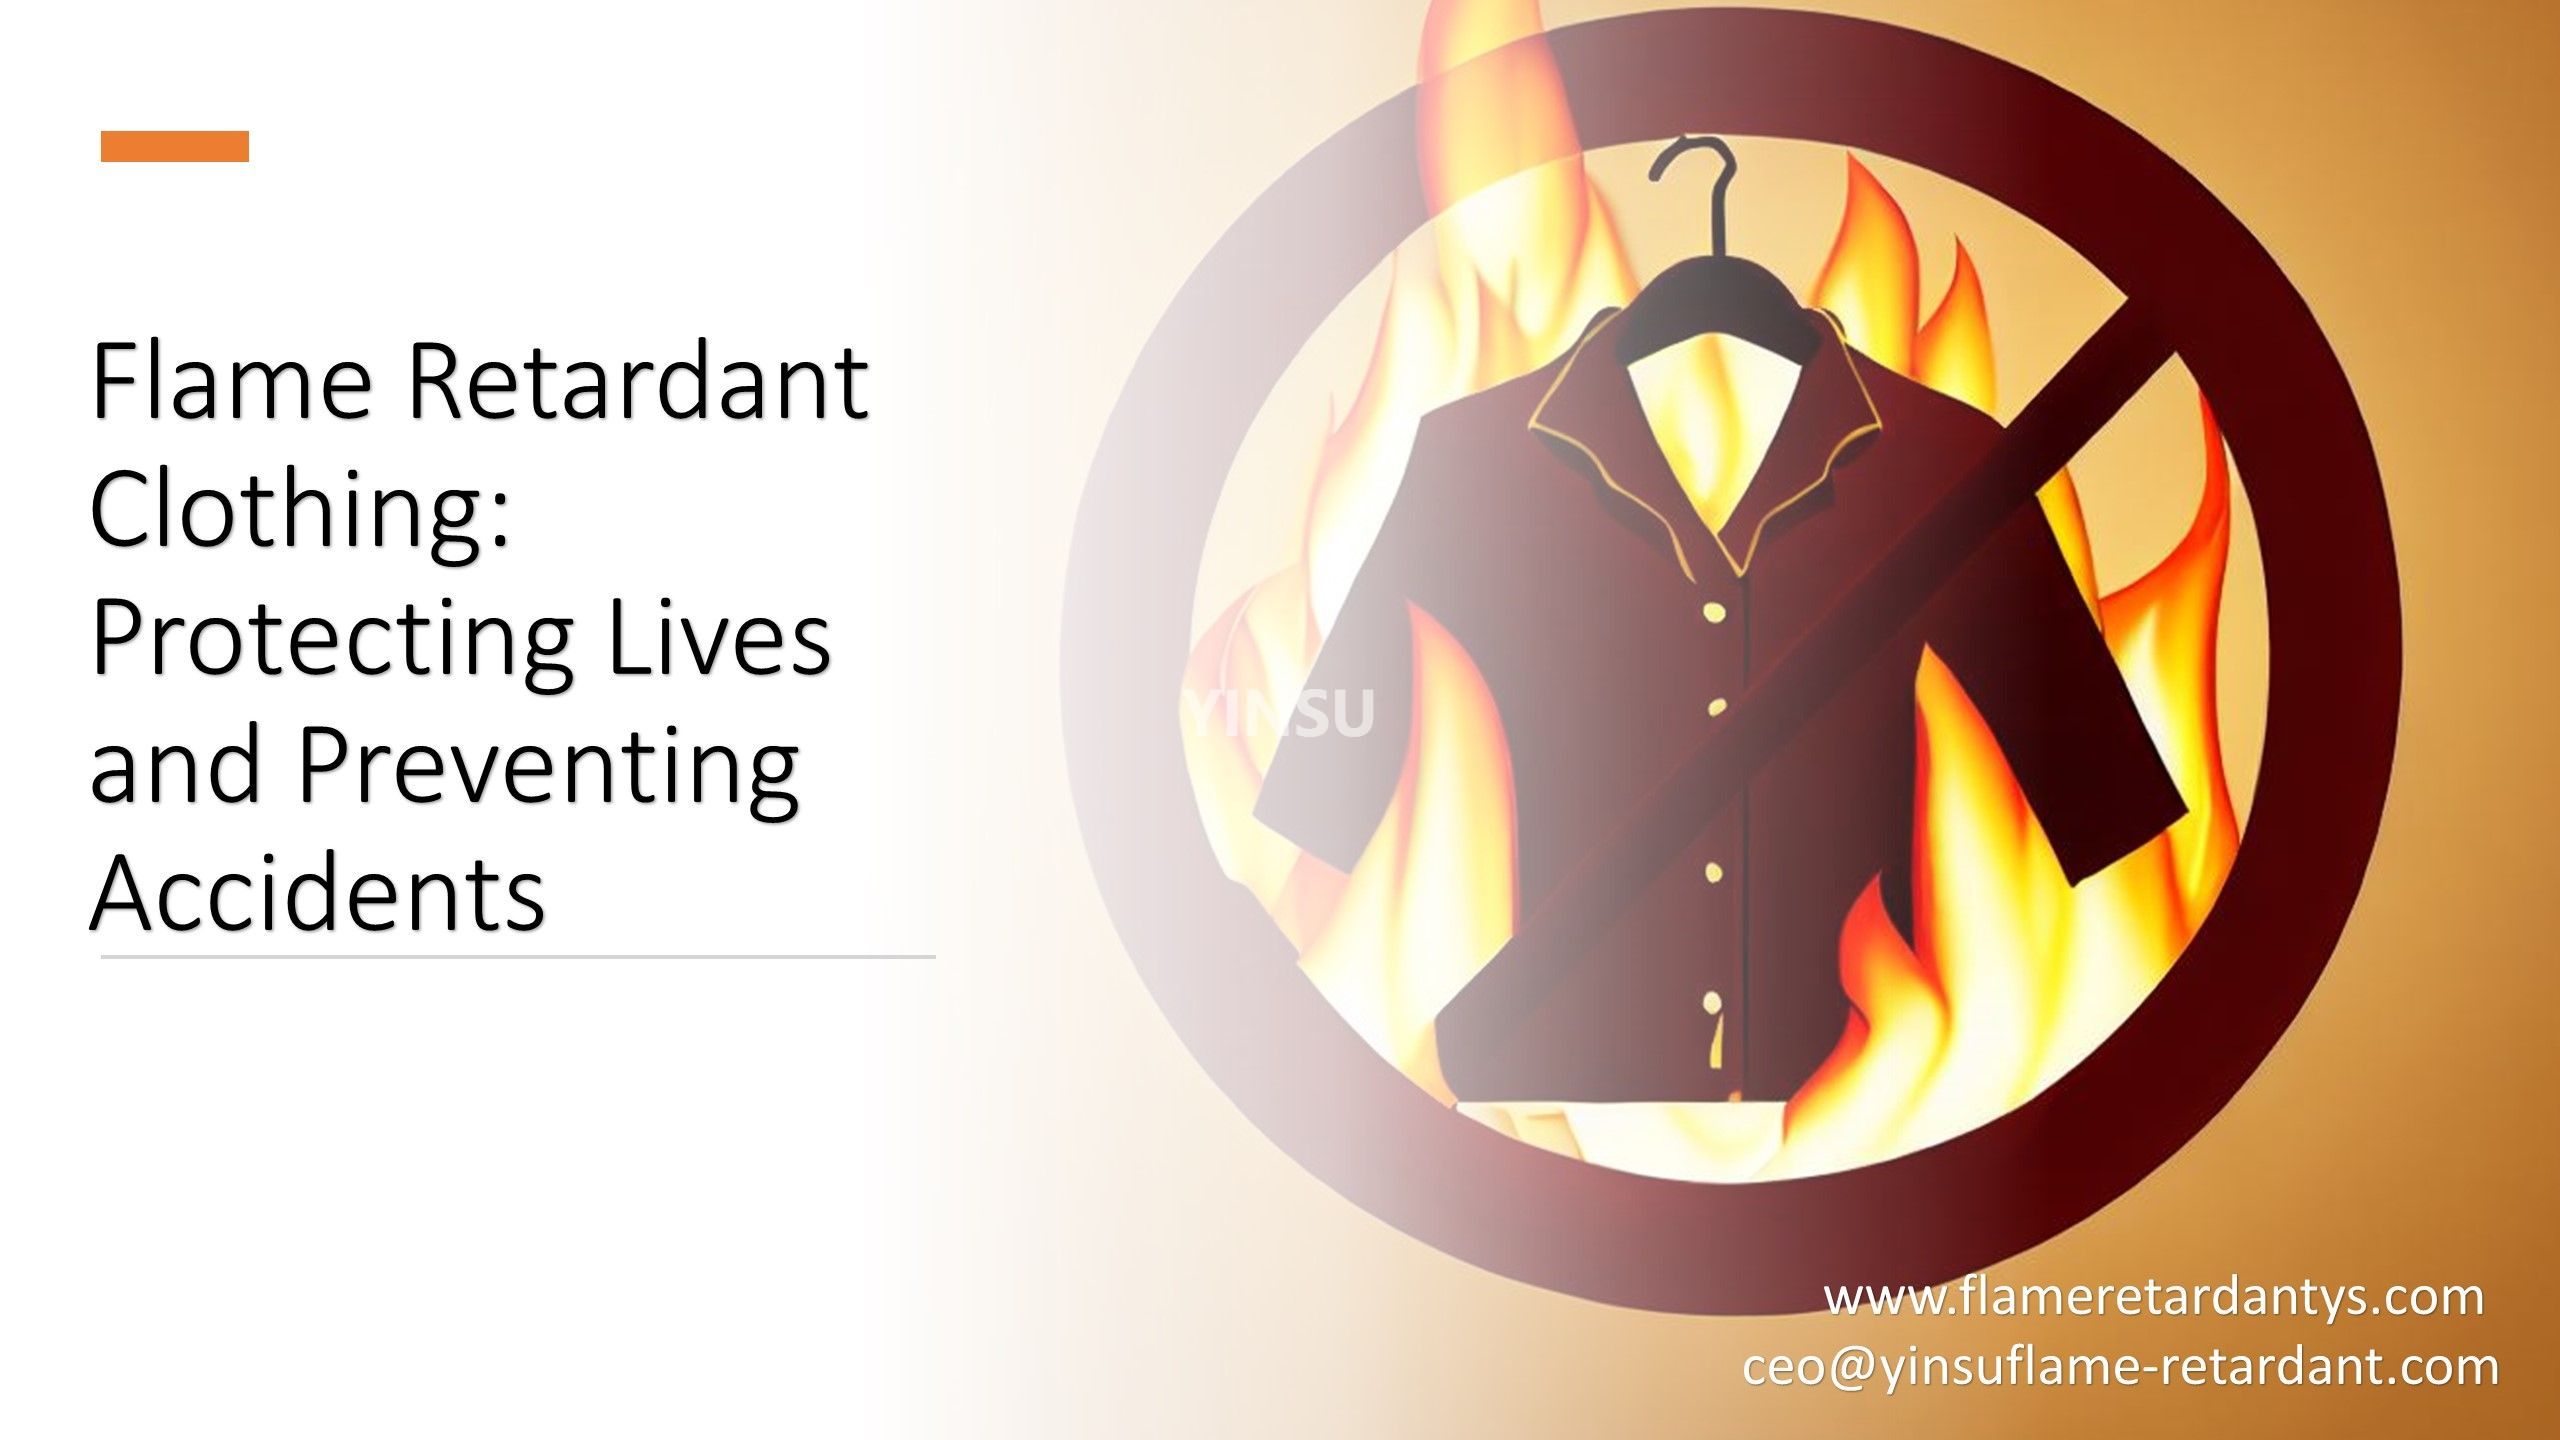 6. Flame Retardant Clothing Protecting Lives and Preventing Accidents